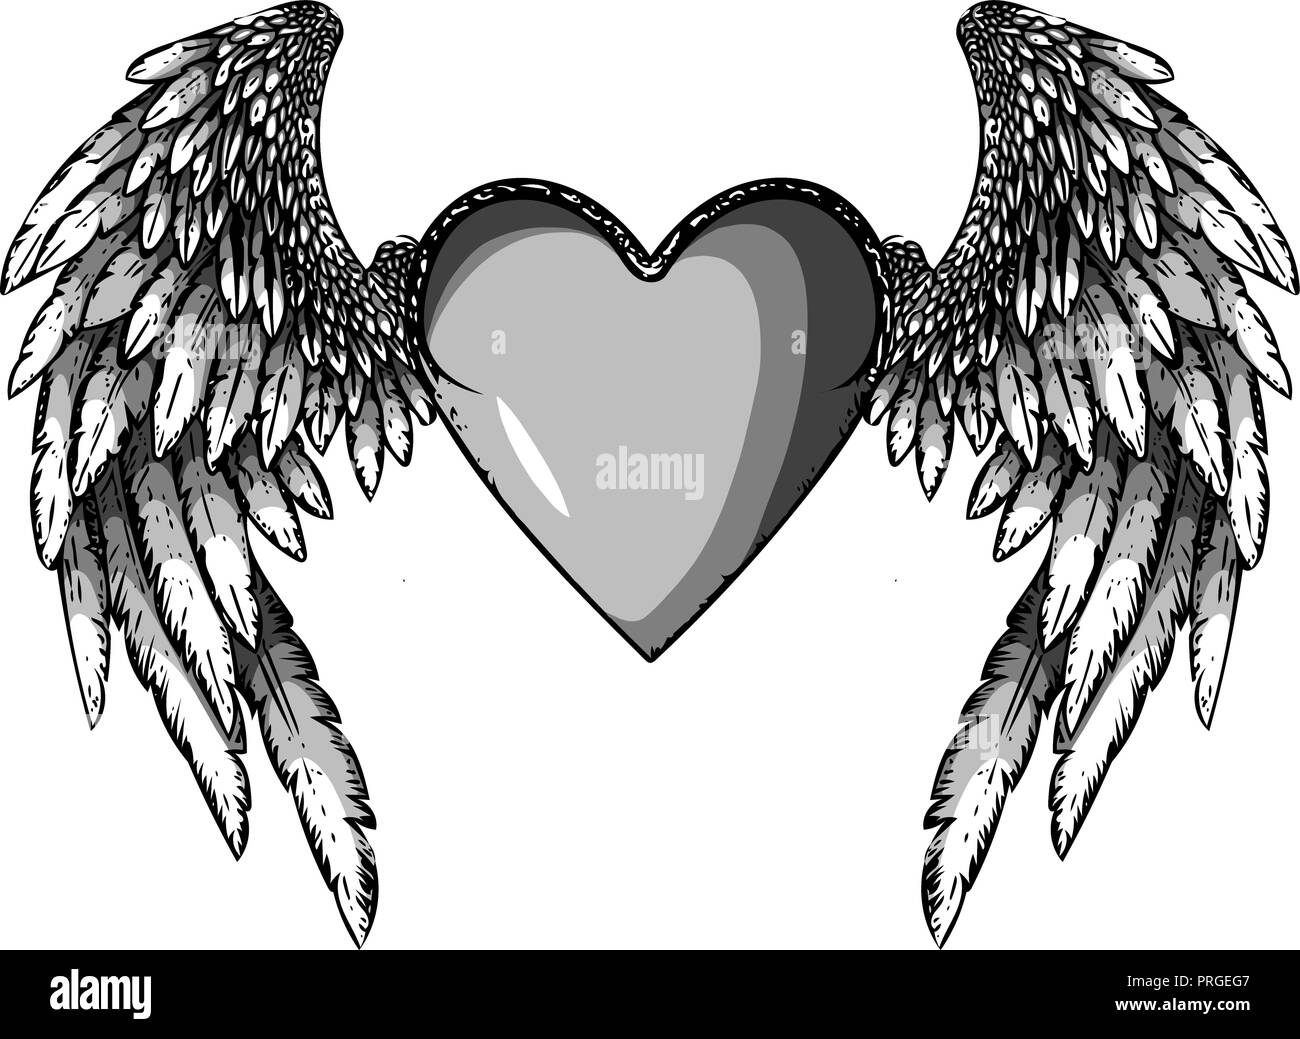 Heart. Design for Valentines Day. Isolated on white background. Vector illustration. Stock Vector